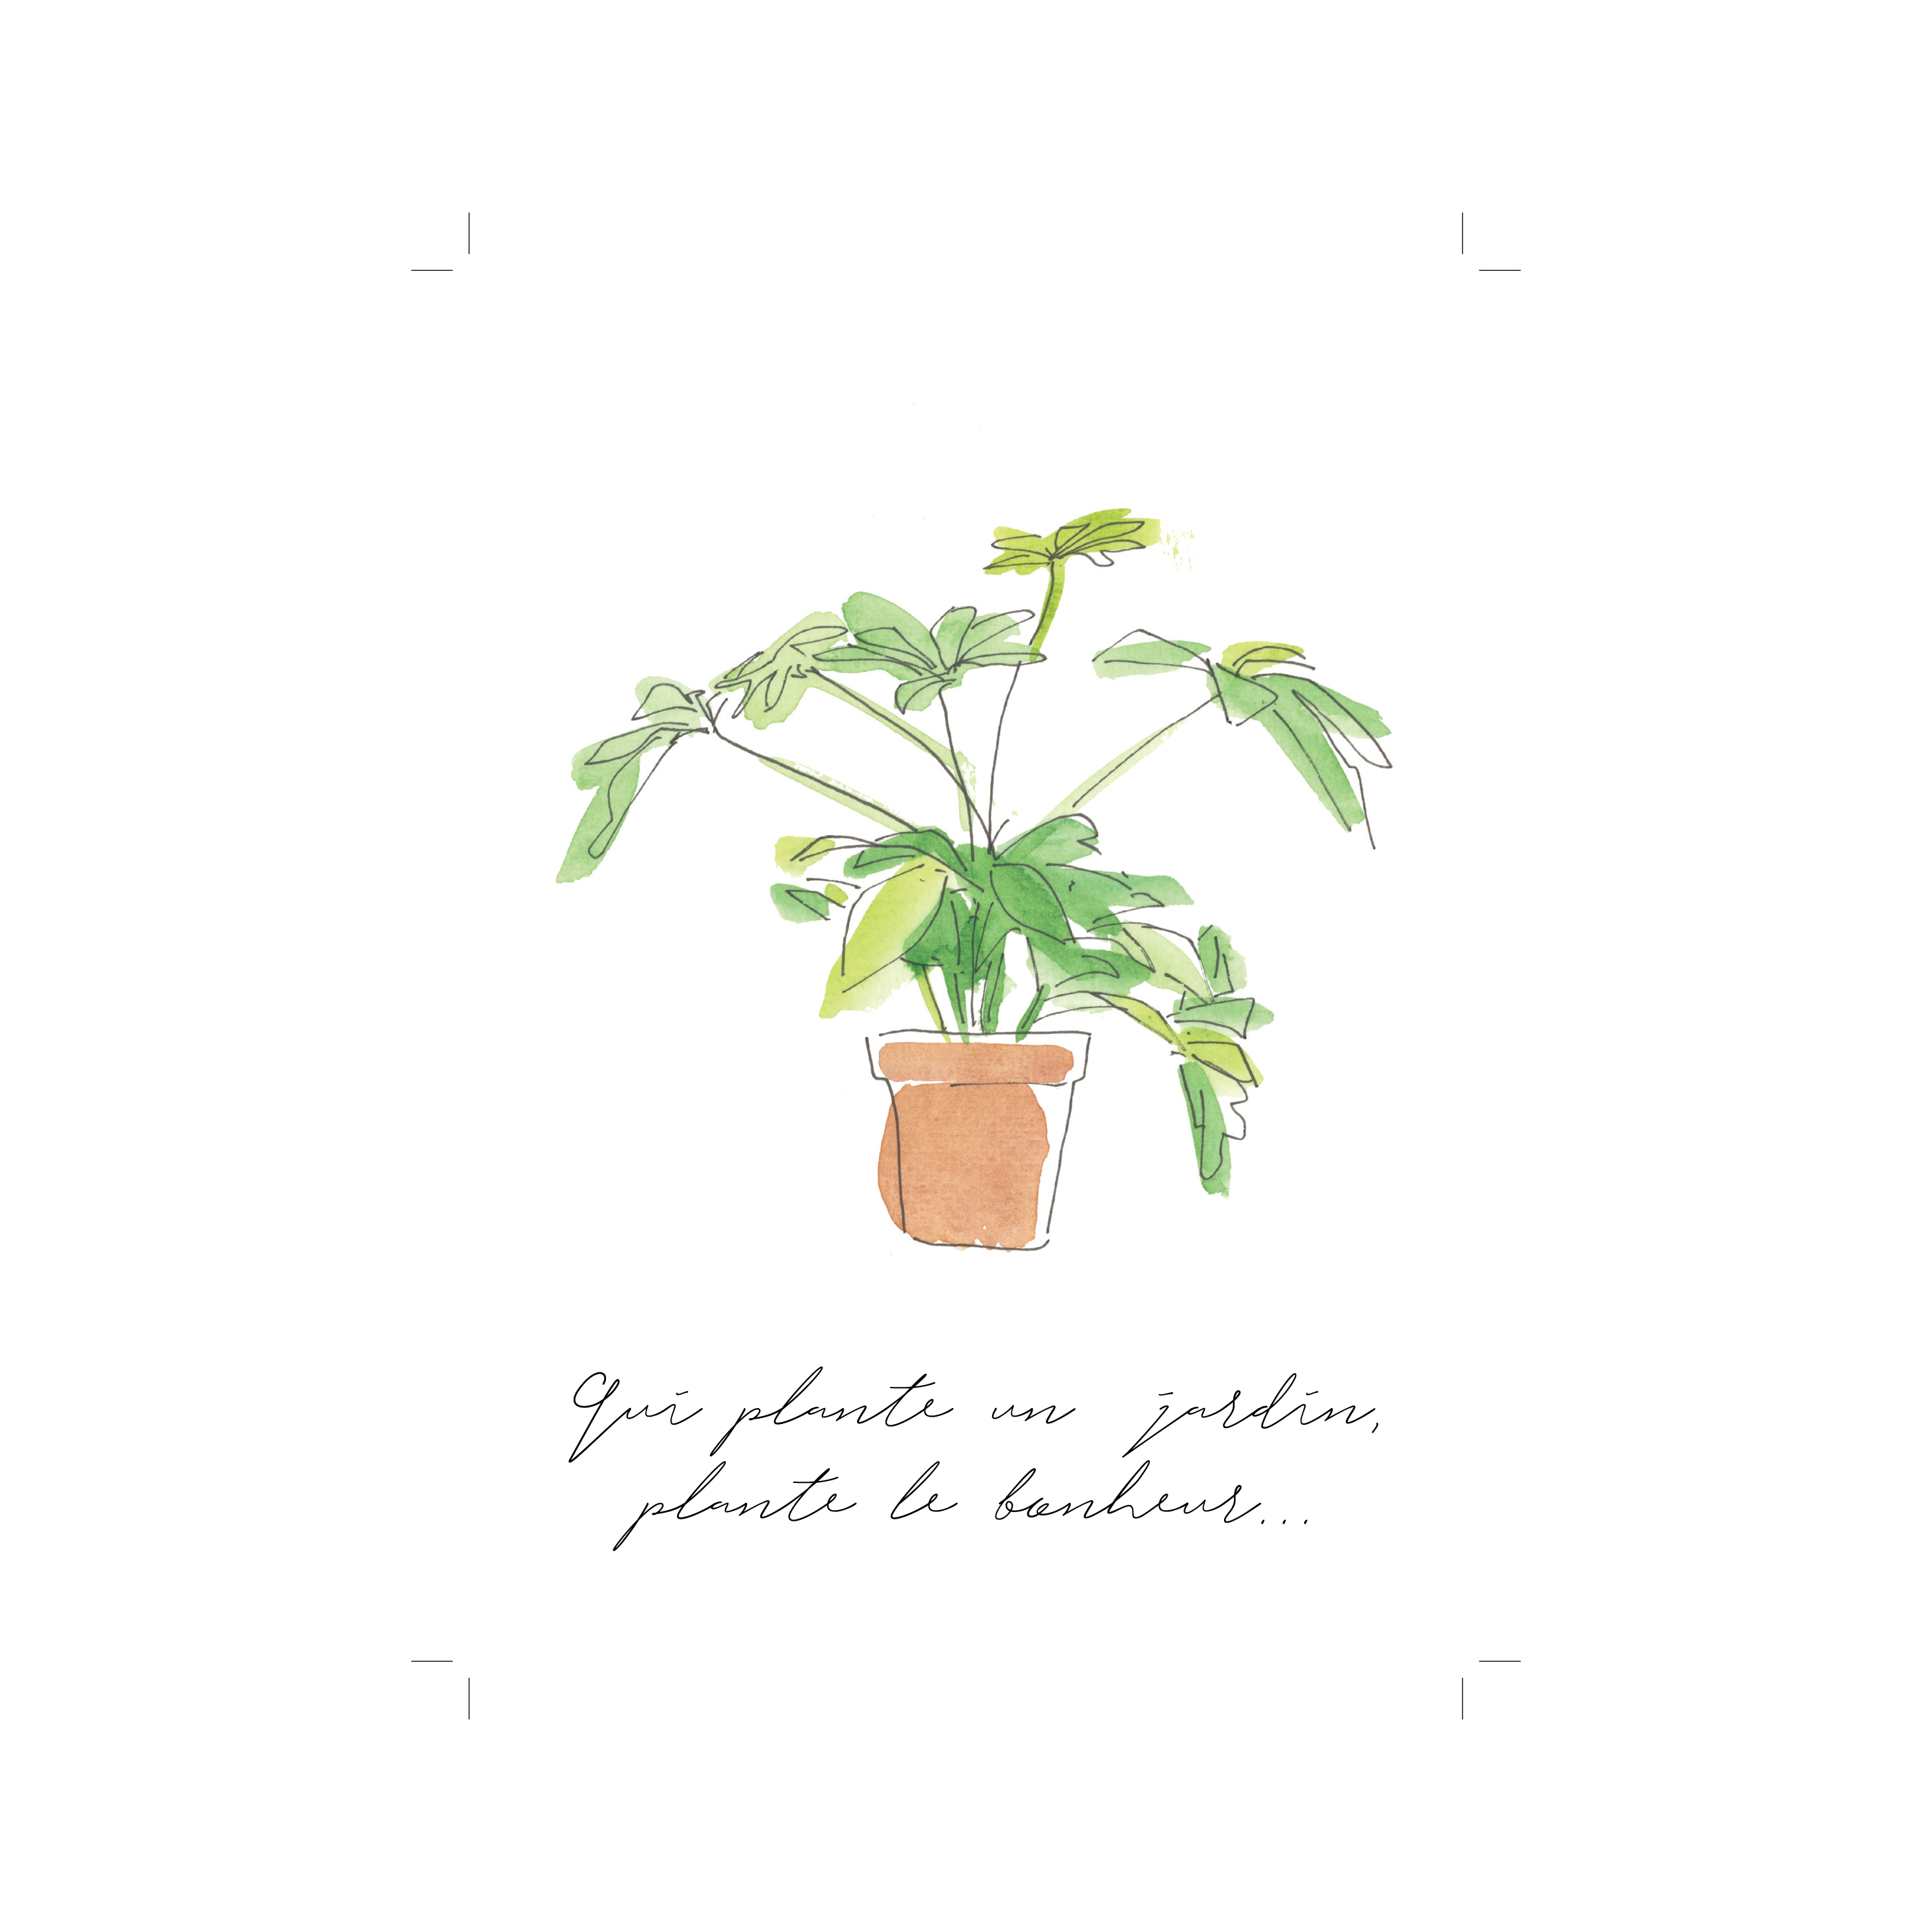 An illustration of a plant in a pot from a top plant nursery near me.